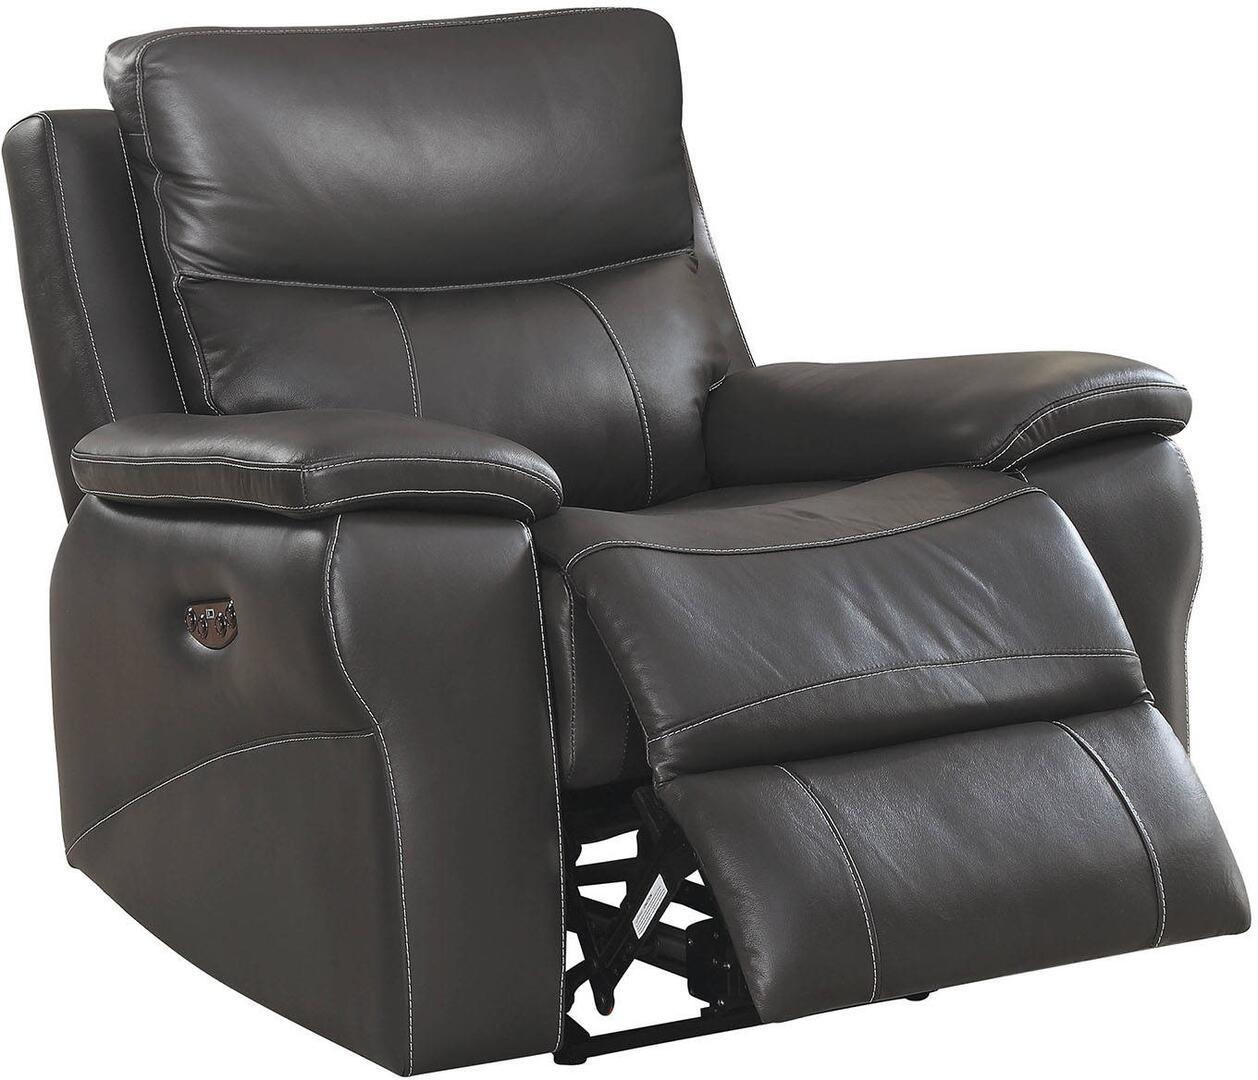 Transitional Power recliner CM6540-PM-CH Lila CM6540-PM-CH in Gray Top grain leather